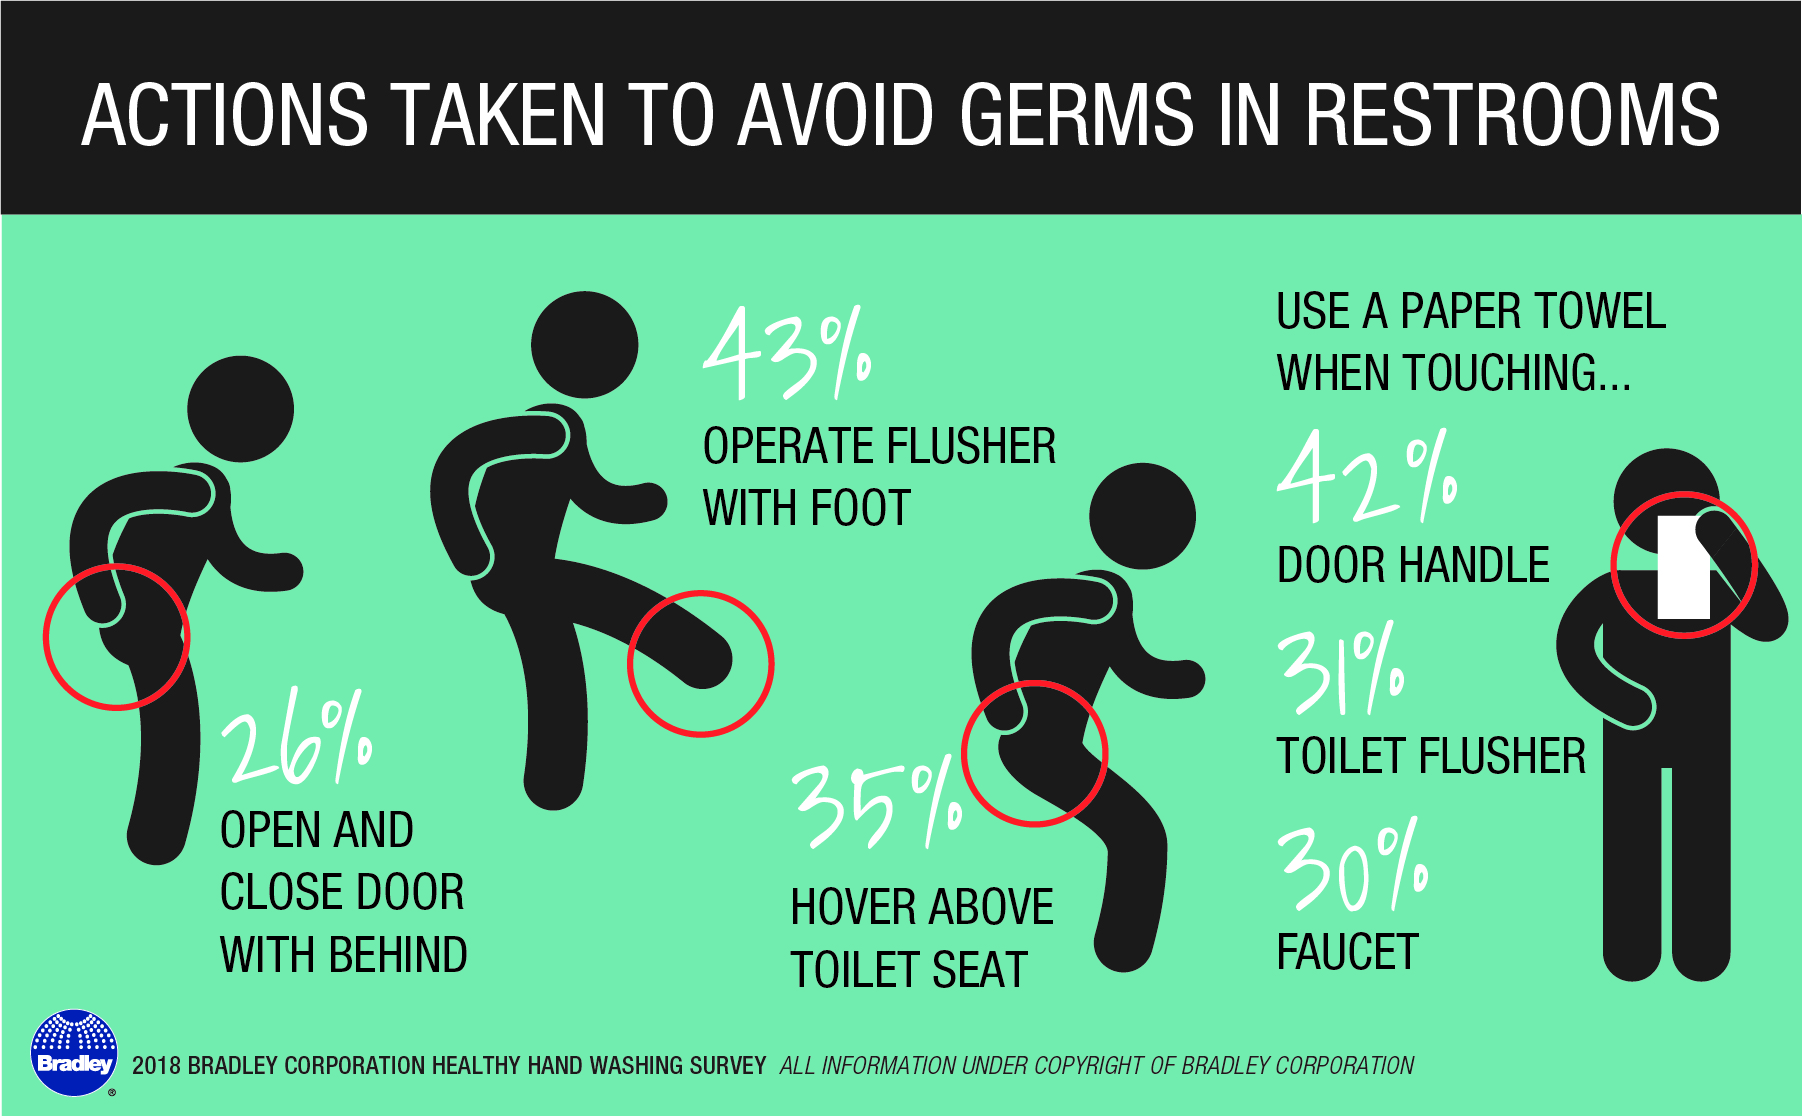 Americans literally go out of their way to avoid contact with surfaces in restrooms.